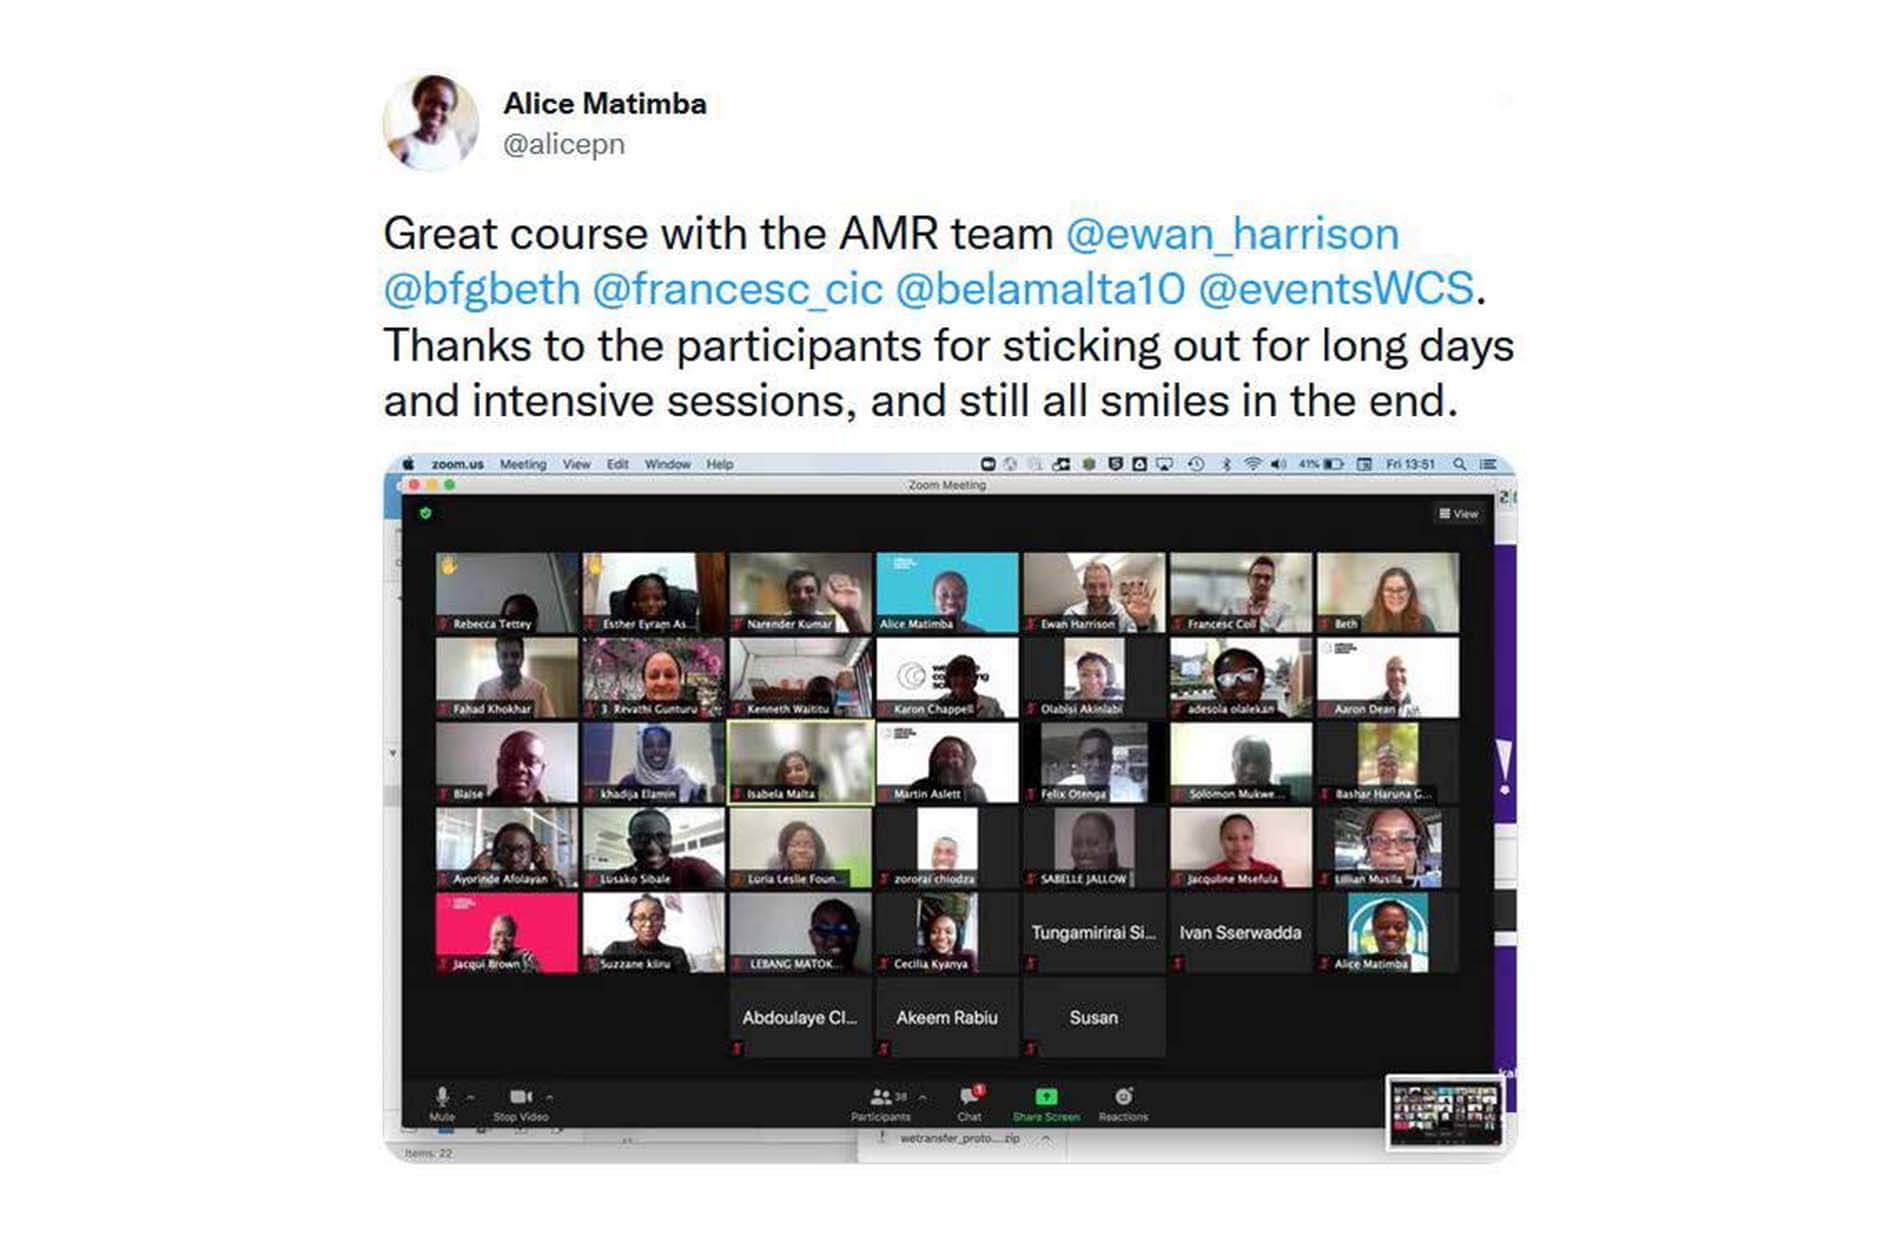 Tweet that reads: Great course with the AMR team @ewan_harrison @bfgbeth @francesc_cic @belamalta10 @eventsWCS. Thanks to the participants for sticking out for long days and intensve sessions, and still all smiles in the end. With image of course participants on Zoom call.